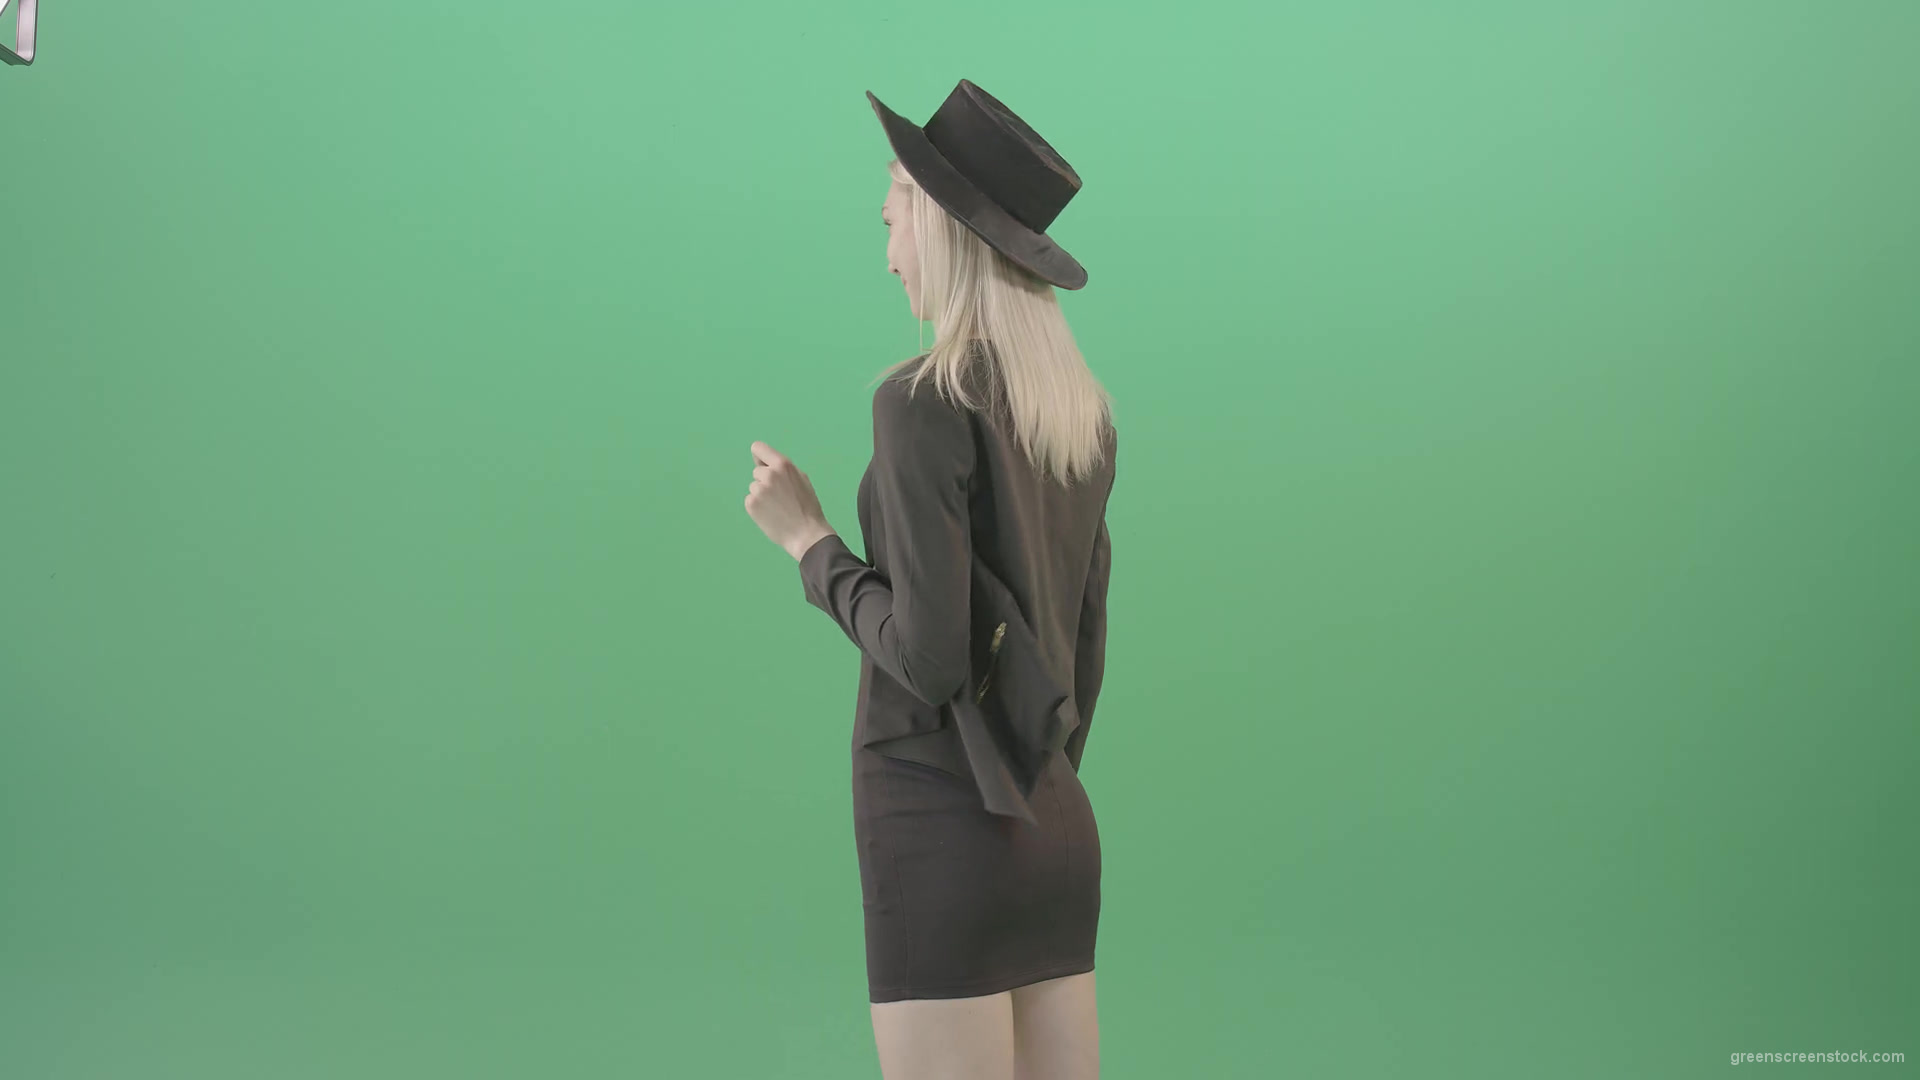 Back-view-black-costume-blonde-girl-looking-virtual-products-on-touch-screen-4K-Green-Screen-Video-Footage-1920_009 Green Screen Stock